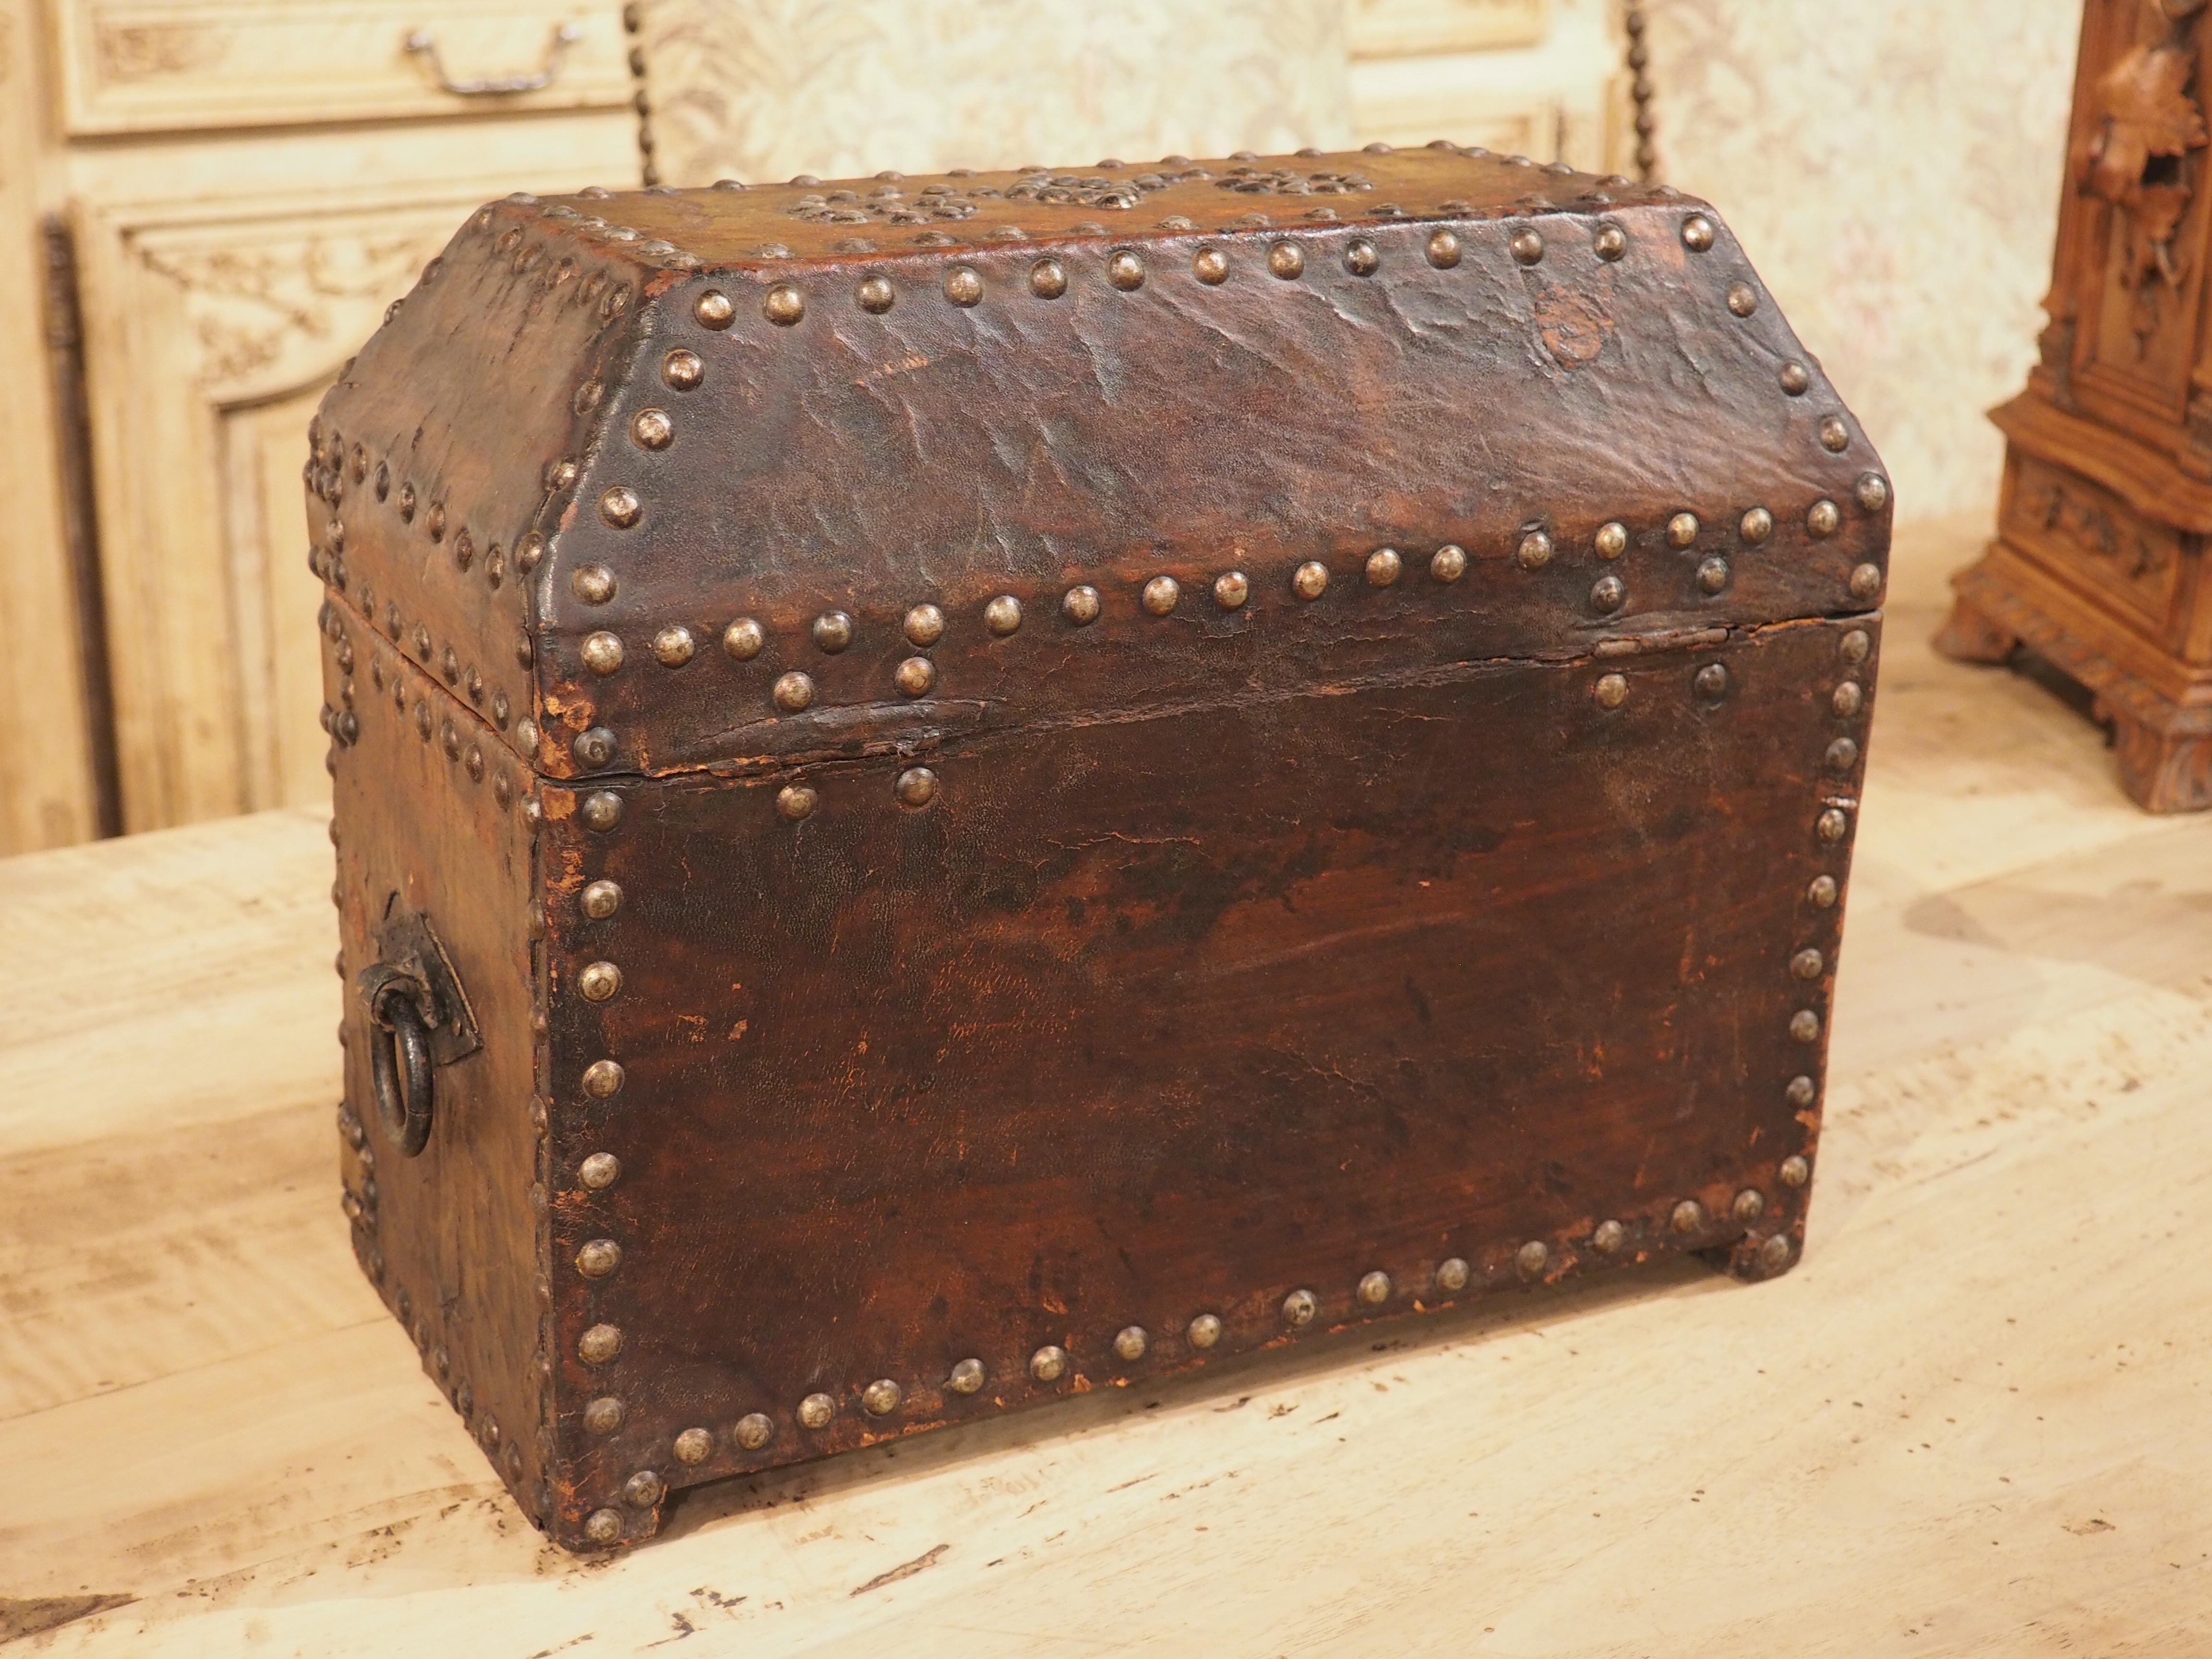 Handcrafted in France during the 1800s, this studded leather table box seamlessly combines functionality and aesthetics. The small rectangular box boasts rich chocolate-colored leather adorned by numerous nailheads, serving both a structural purpose